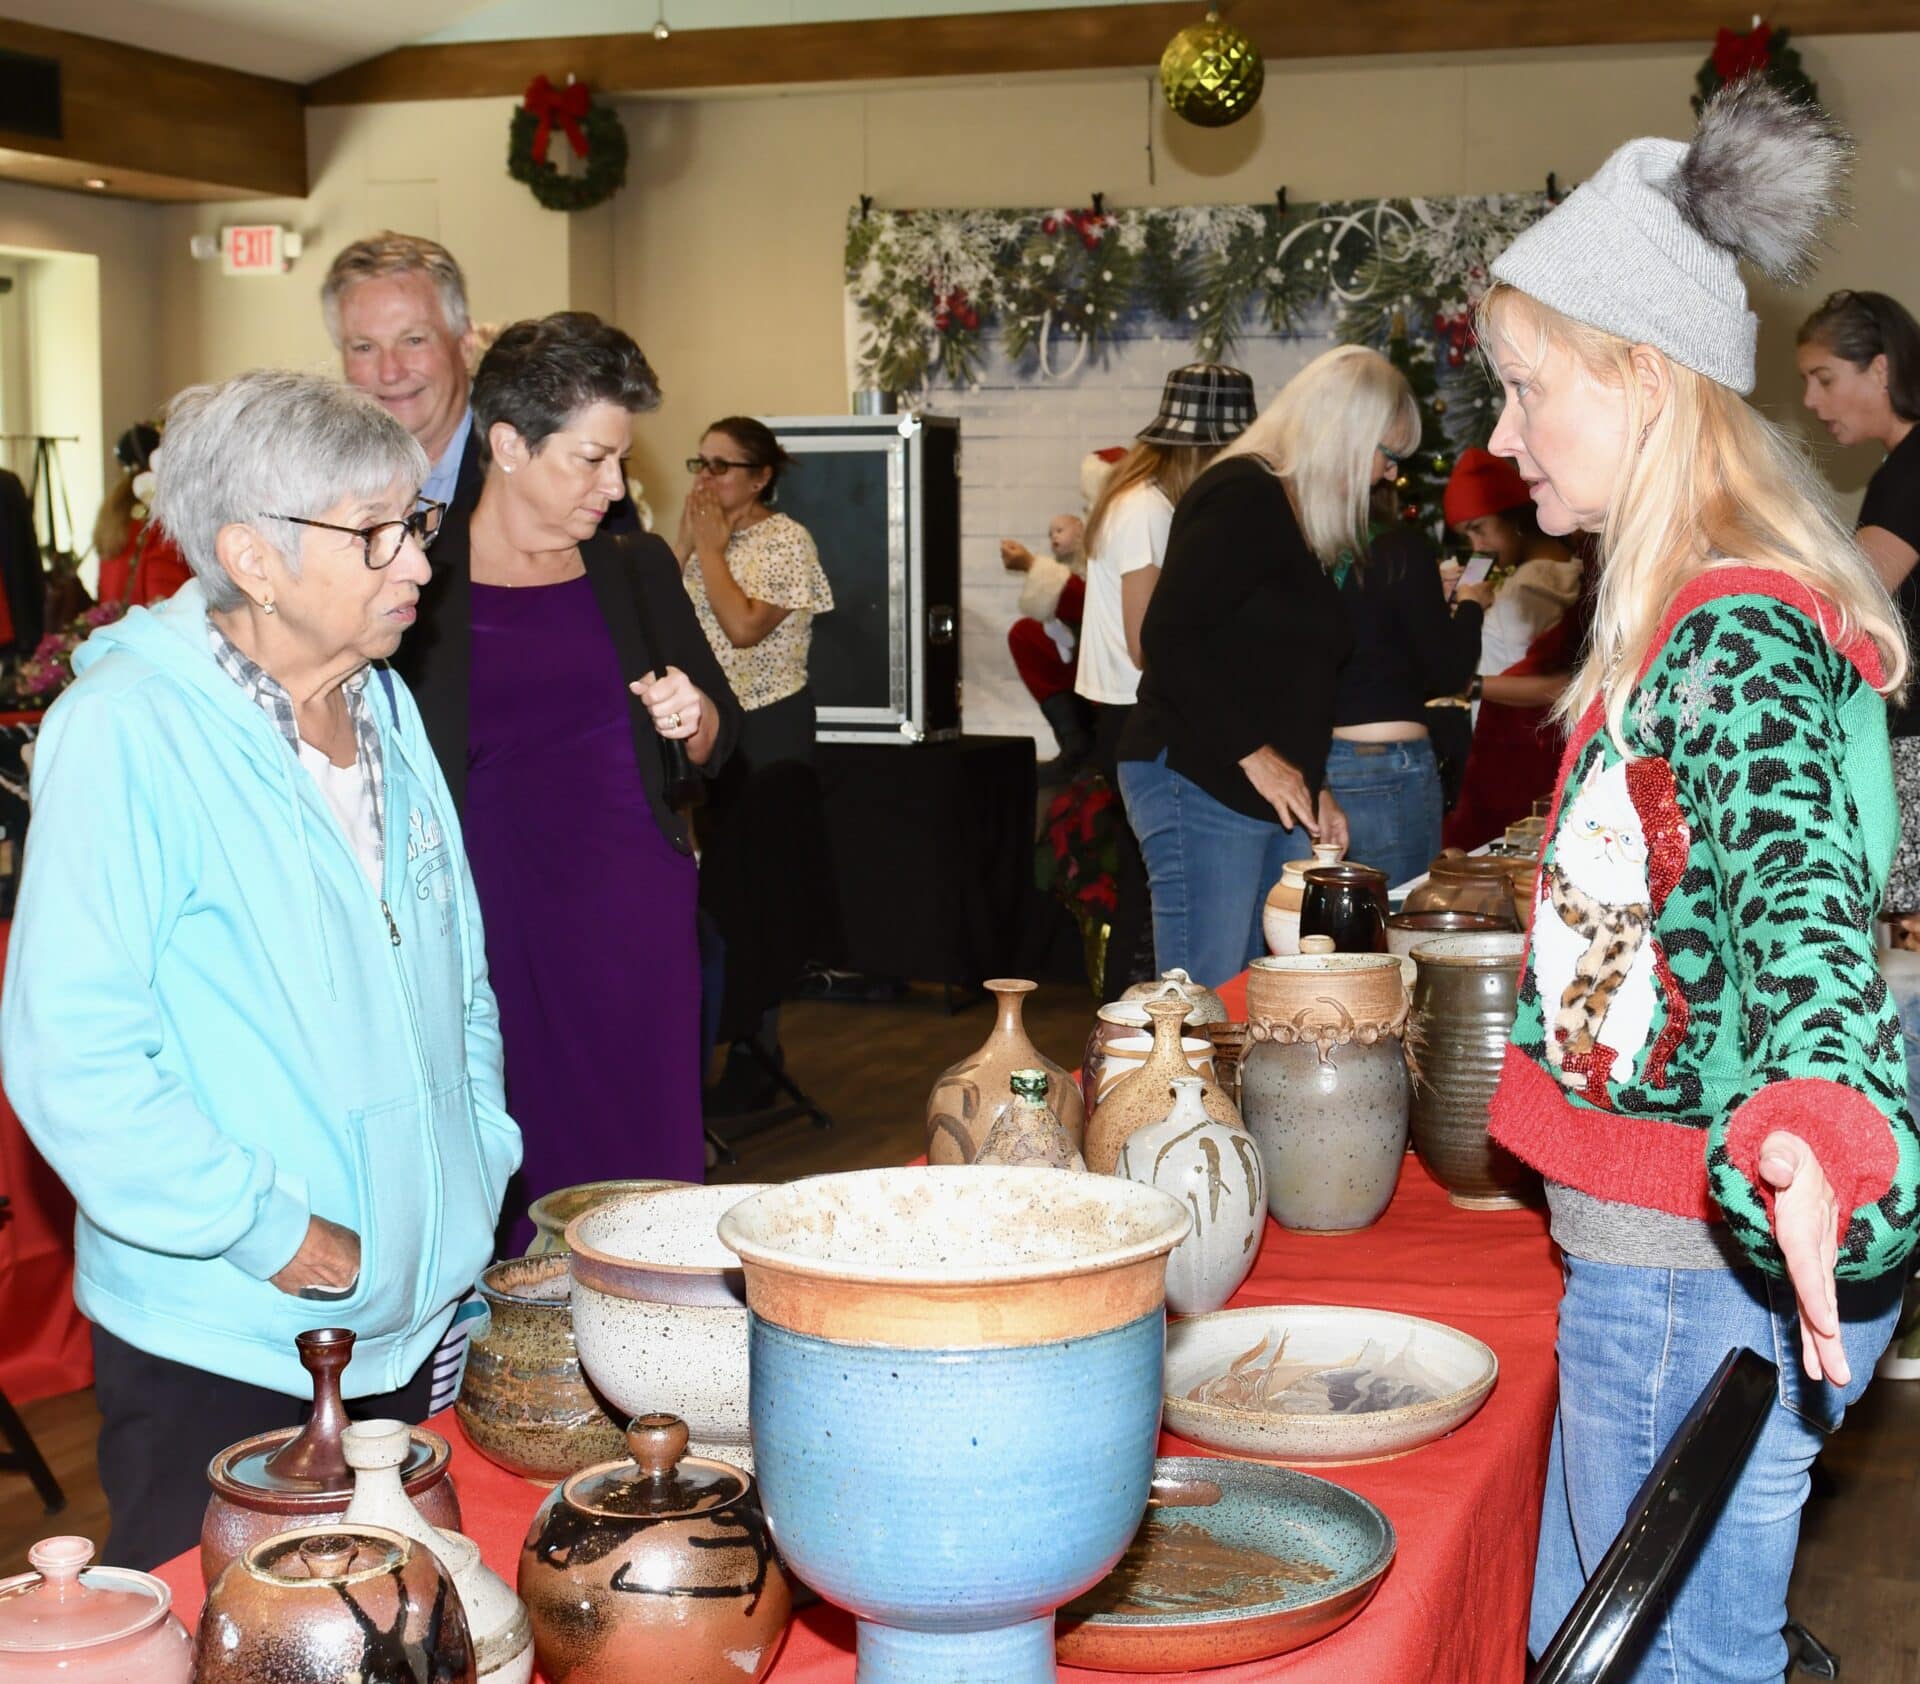 Our Lady of Malibu community to its Christmas Boutique • The